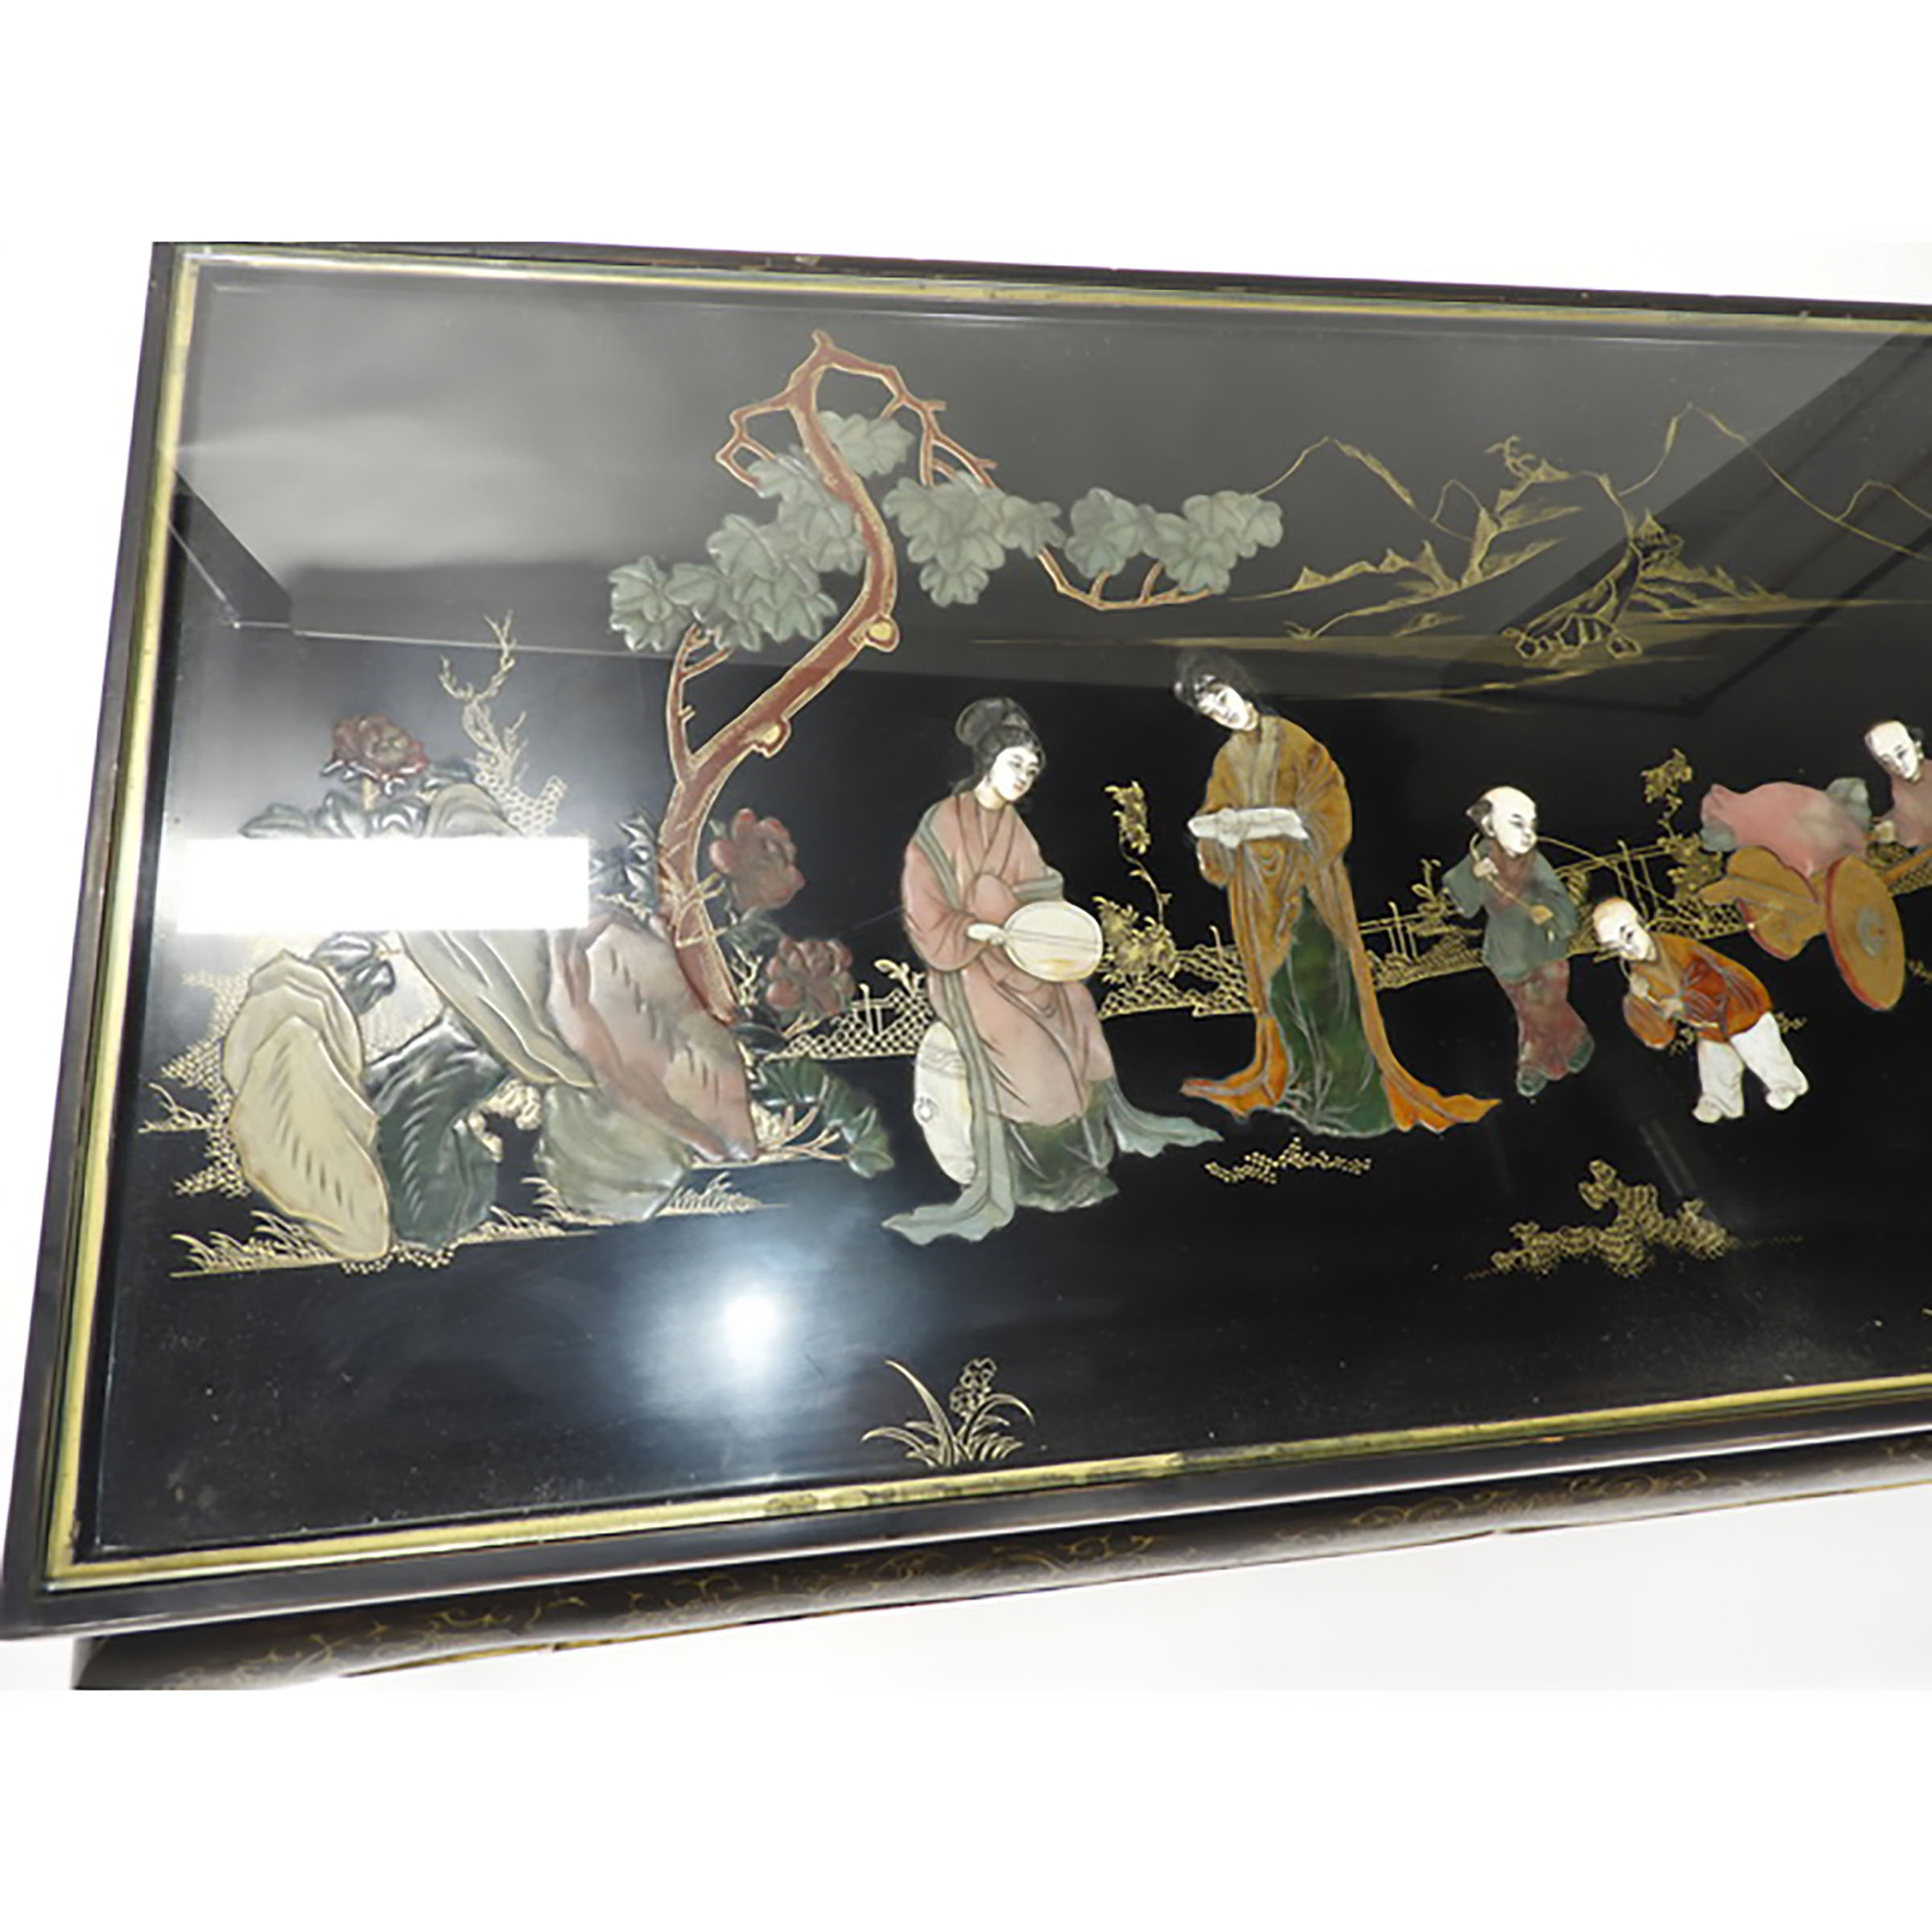 A Chinese Gilded and Lacquered Coffee Table With Glass Top, Early to Mid 20th Century, 民国 描金黑漆人物纹桌, - Image 5 of 6